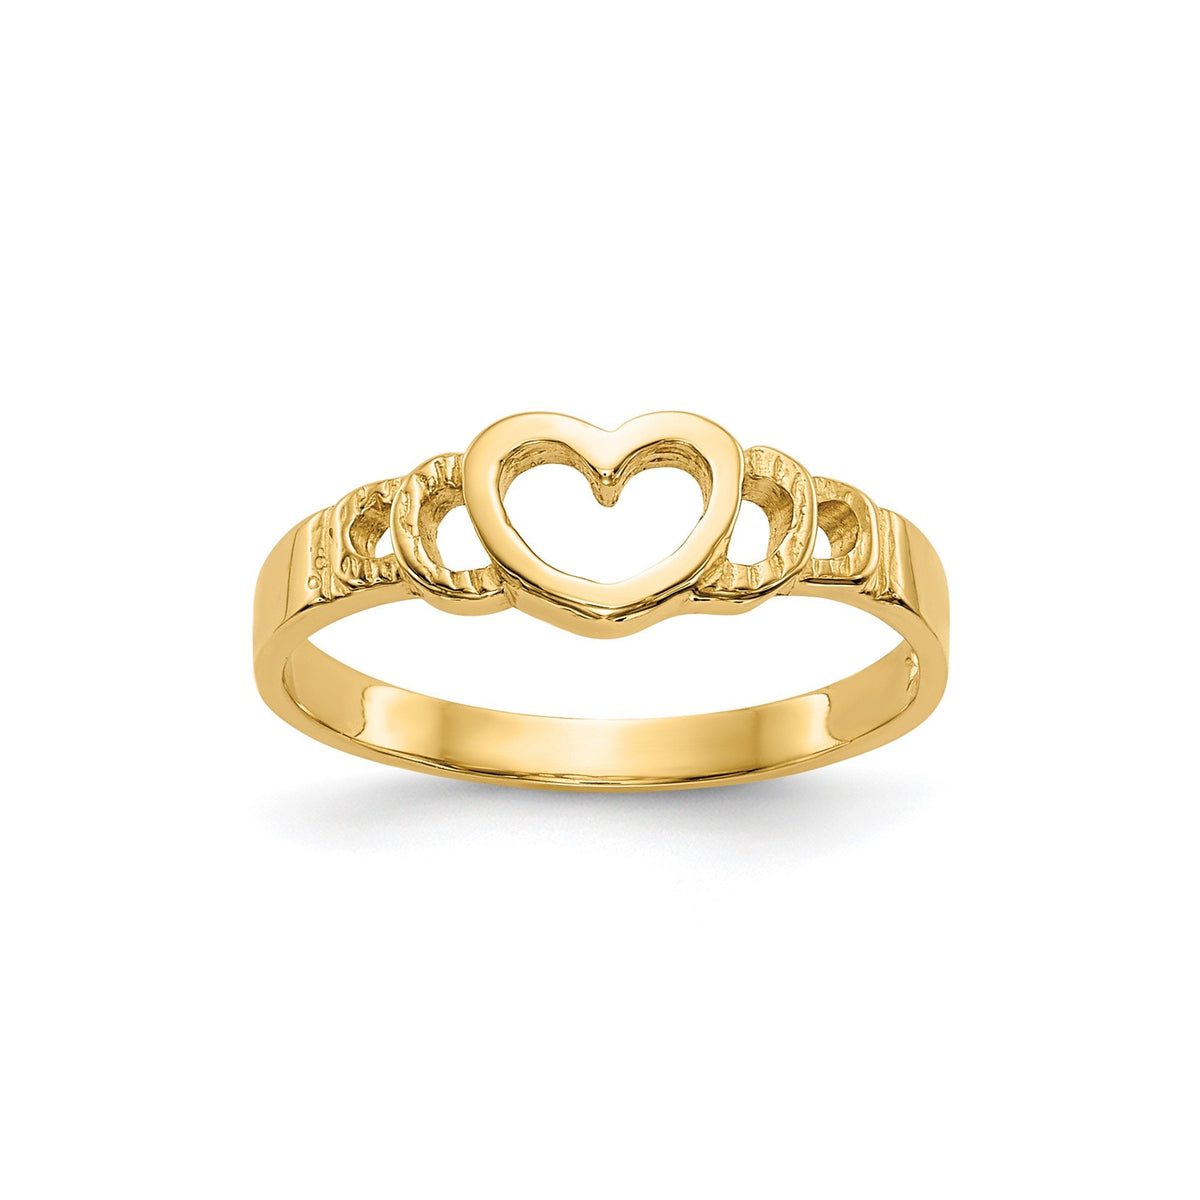 14k Yellow Gold Baby Heart Ring Size 1-4 Baby to Children Size 3mm Band Gift Box Included